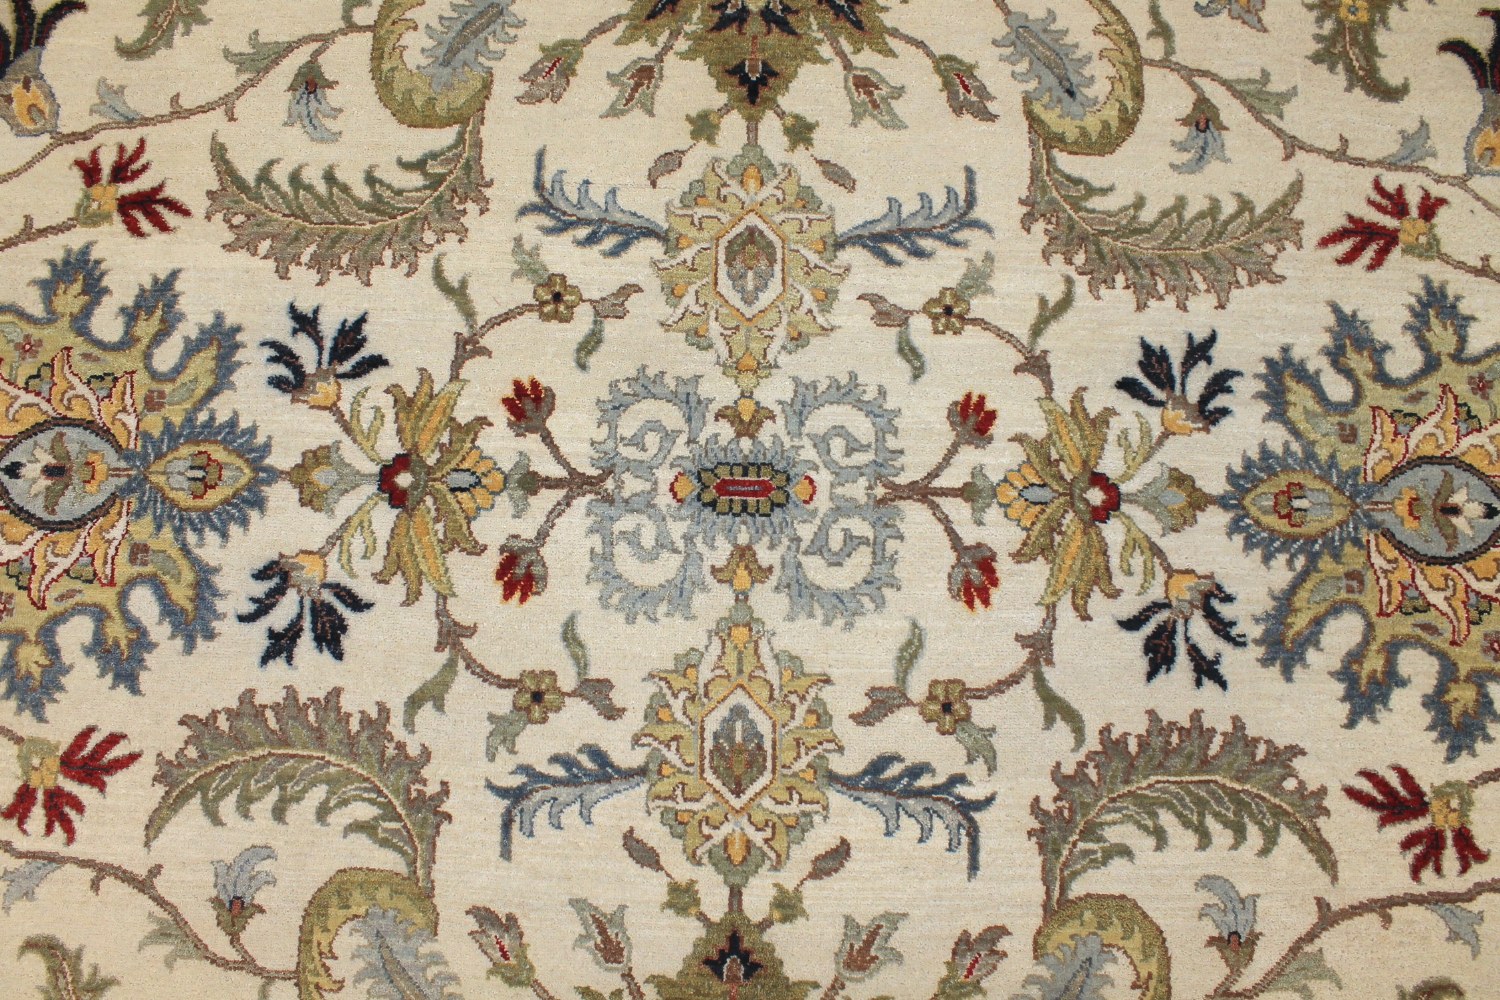 9x12 Traditional Hand Knotted Wool Area Rug - MR027880